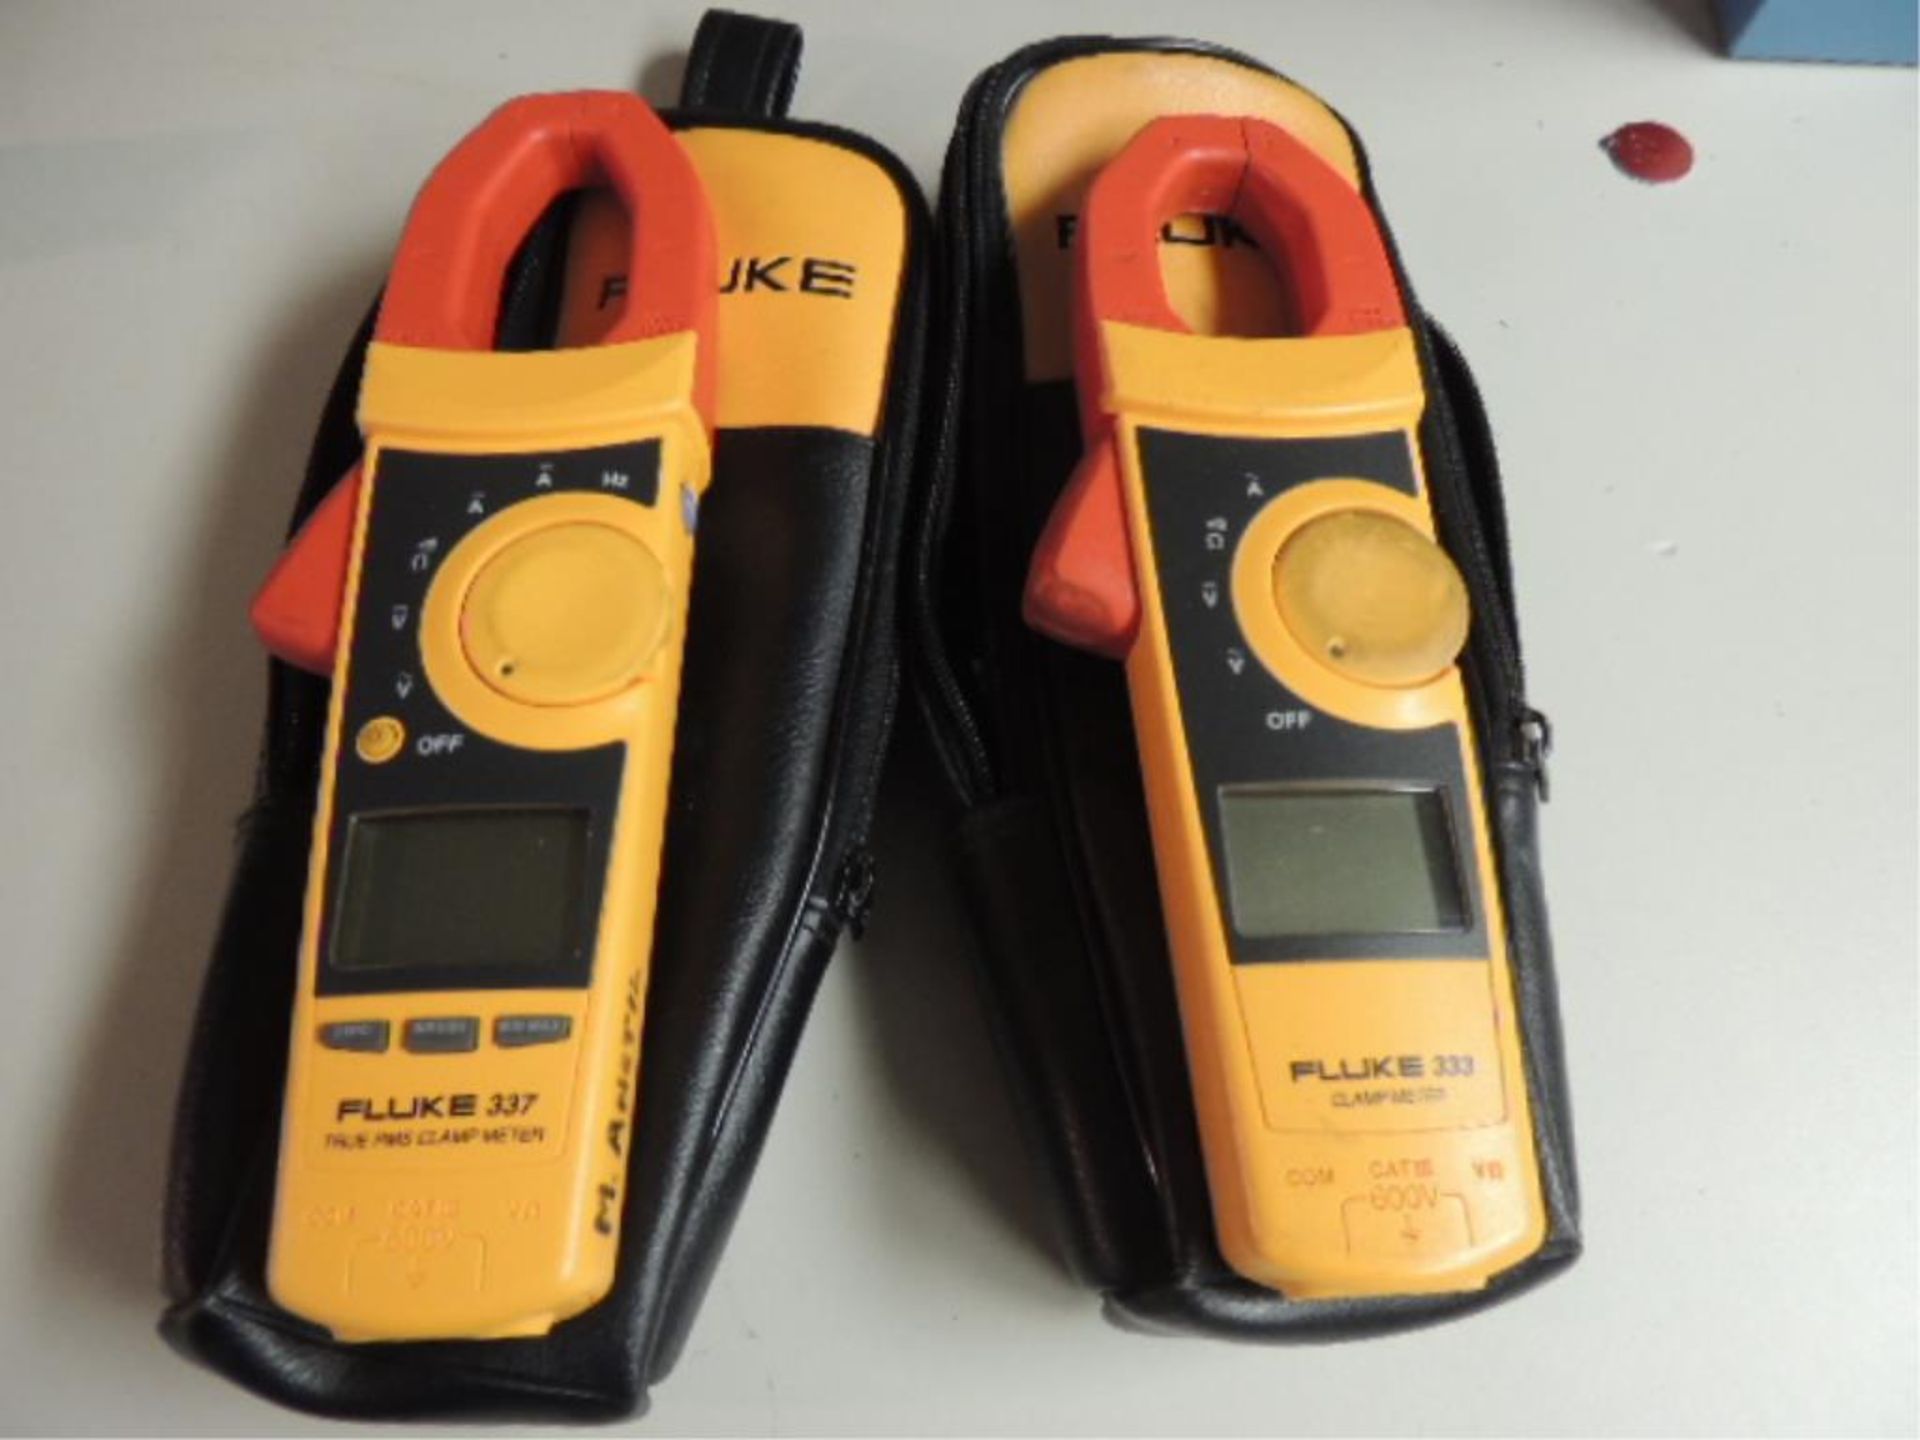 Fluke 337 Tester; Lot: (2) milliamp process clamp meters. HIT# 2192420. Loc: 901 cage. Asset Located